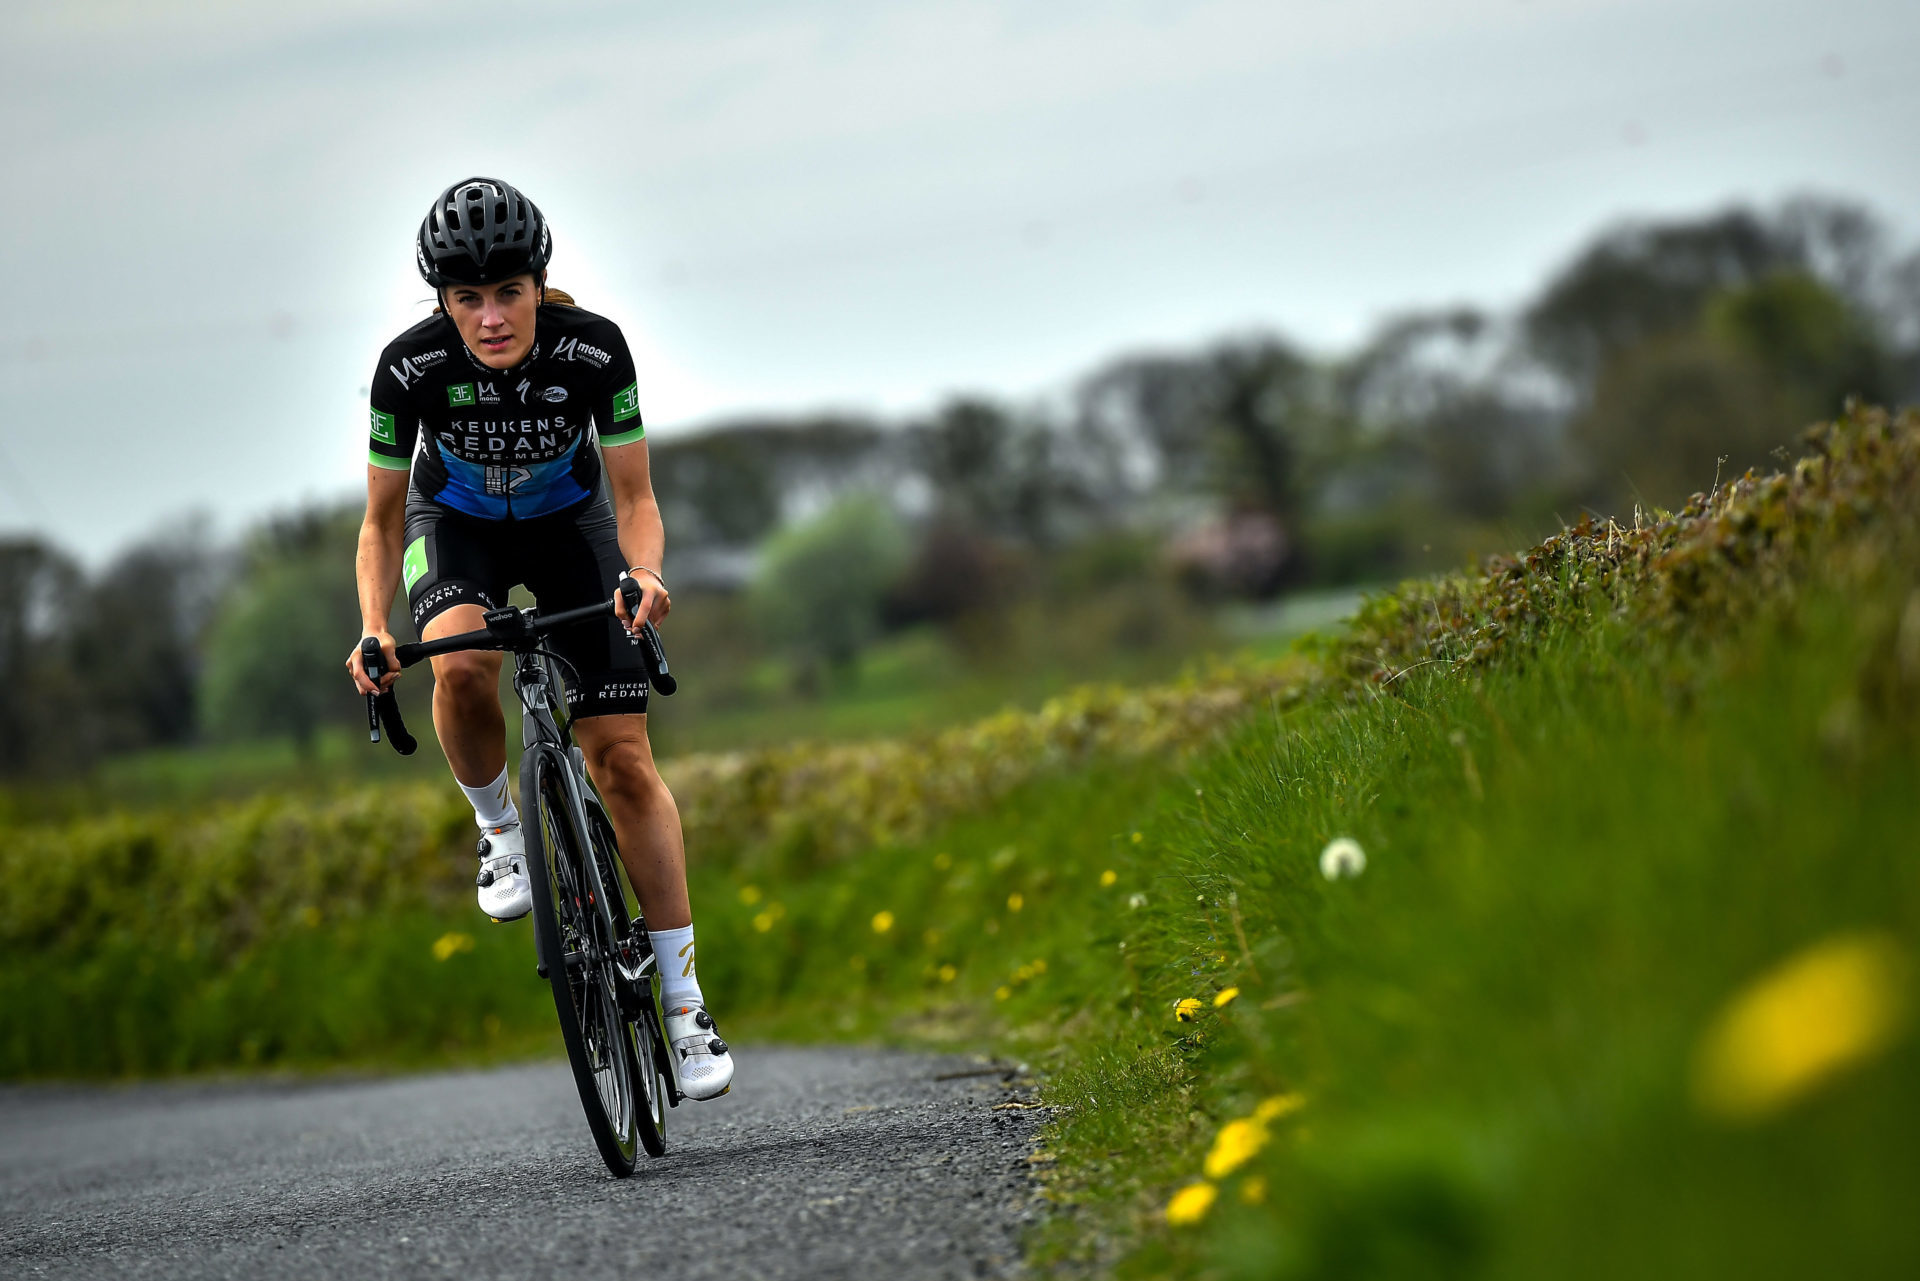 Professional cyclist Imogen Cotter during a training session at her home in Ruan, Clare